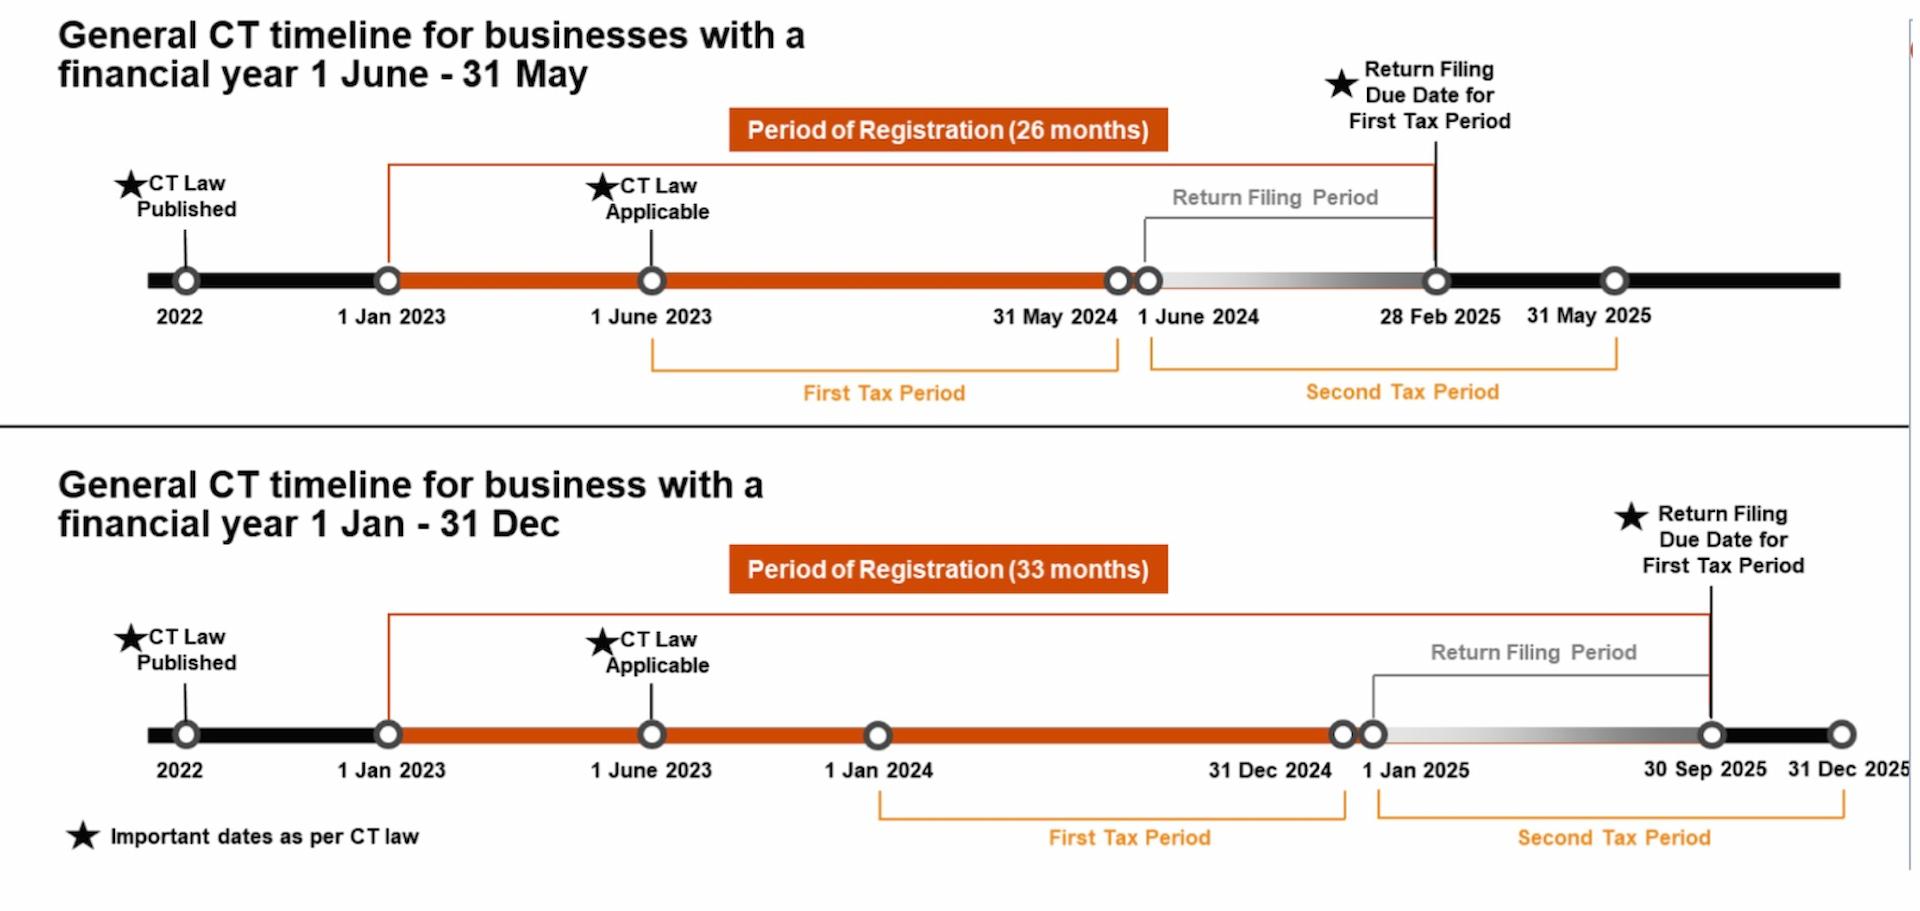 A graphic showing the corporate tax timeline for businesses in the UAE.